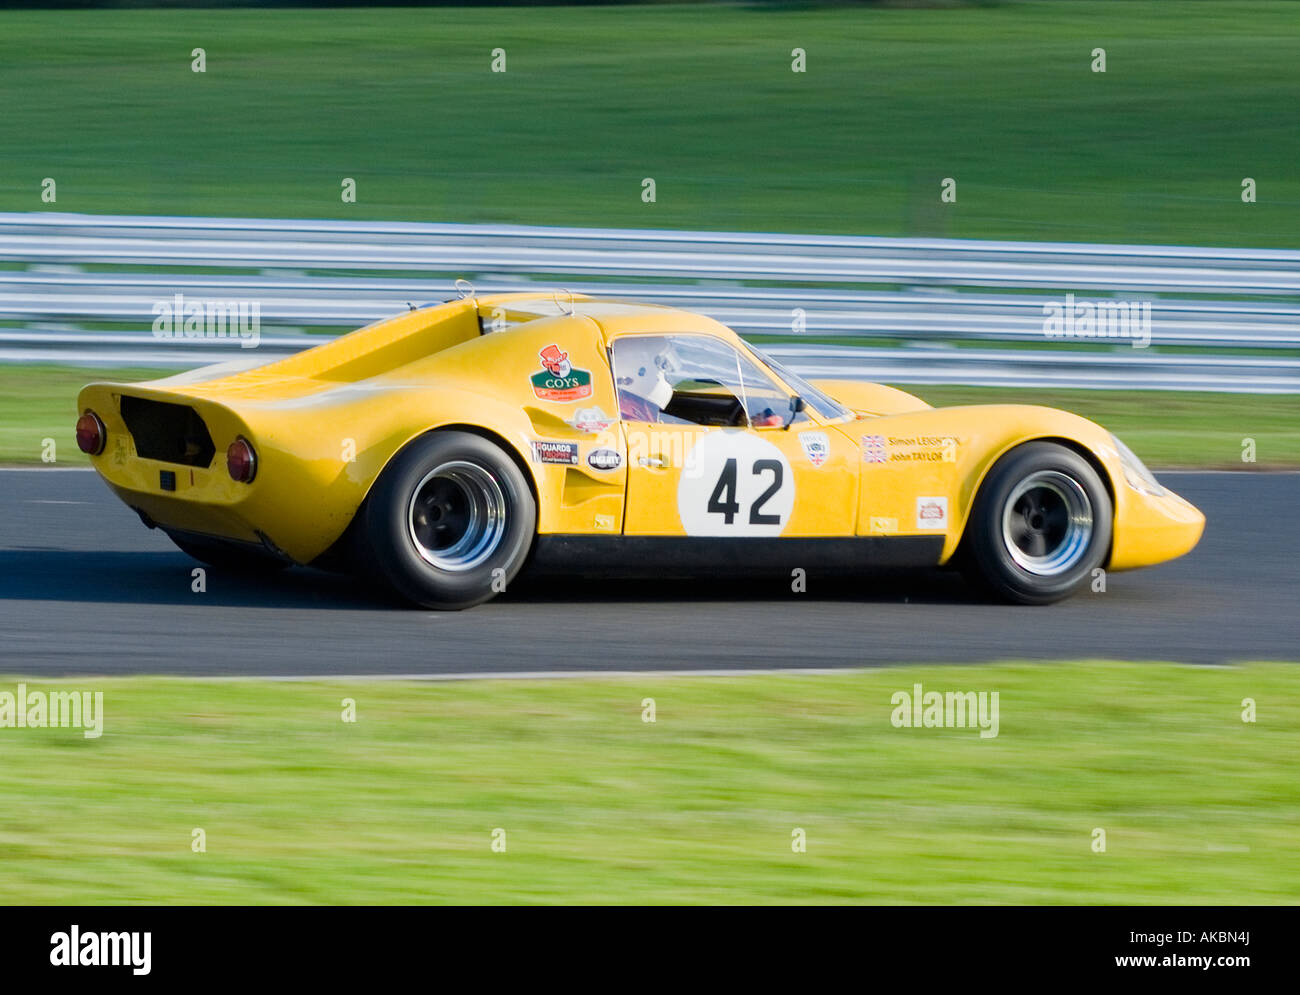 1968 Chevron B8 Sports Racing Car at Oulton Park Race Circuit in Cheshire United Kingdom Stock Photo